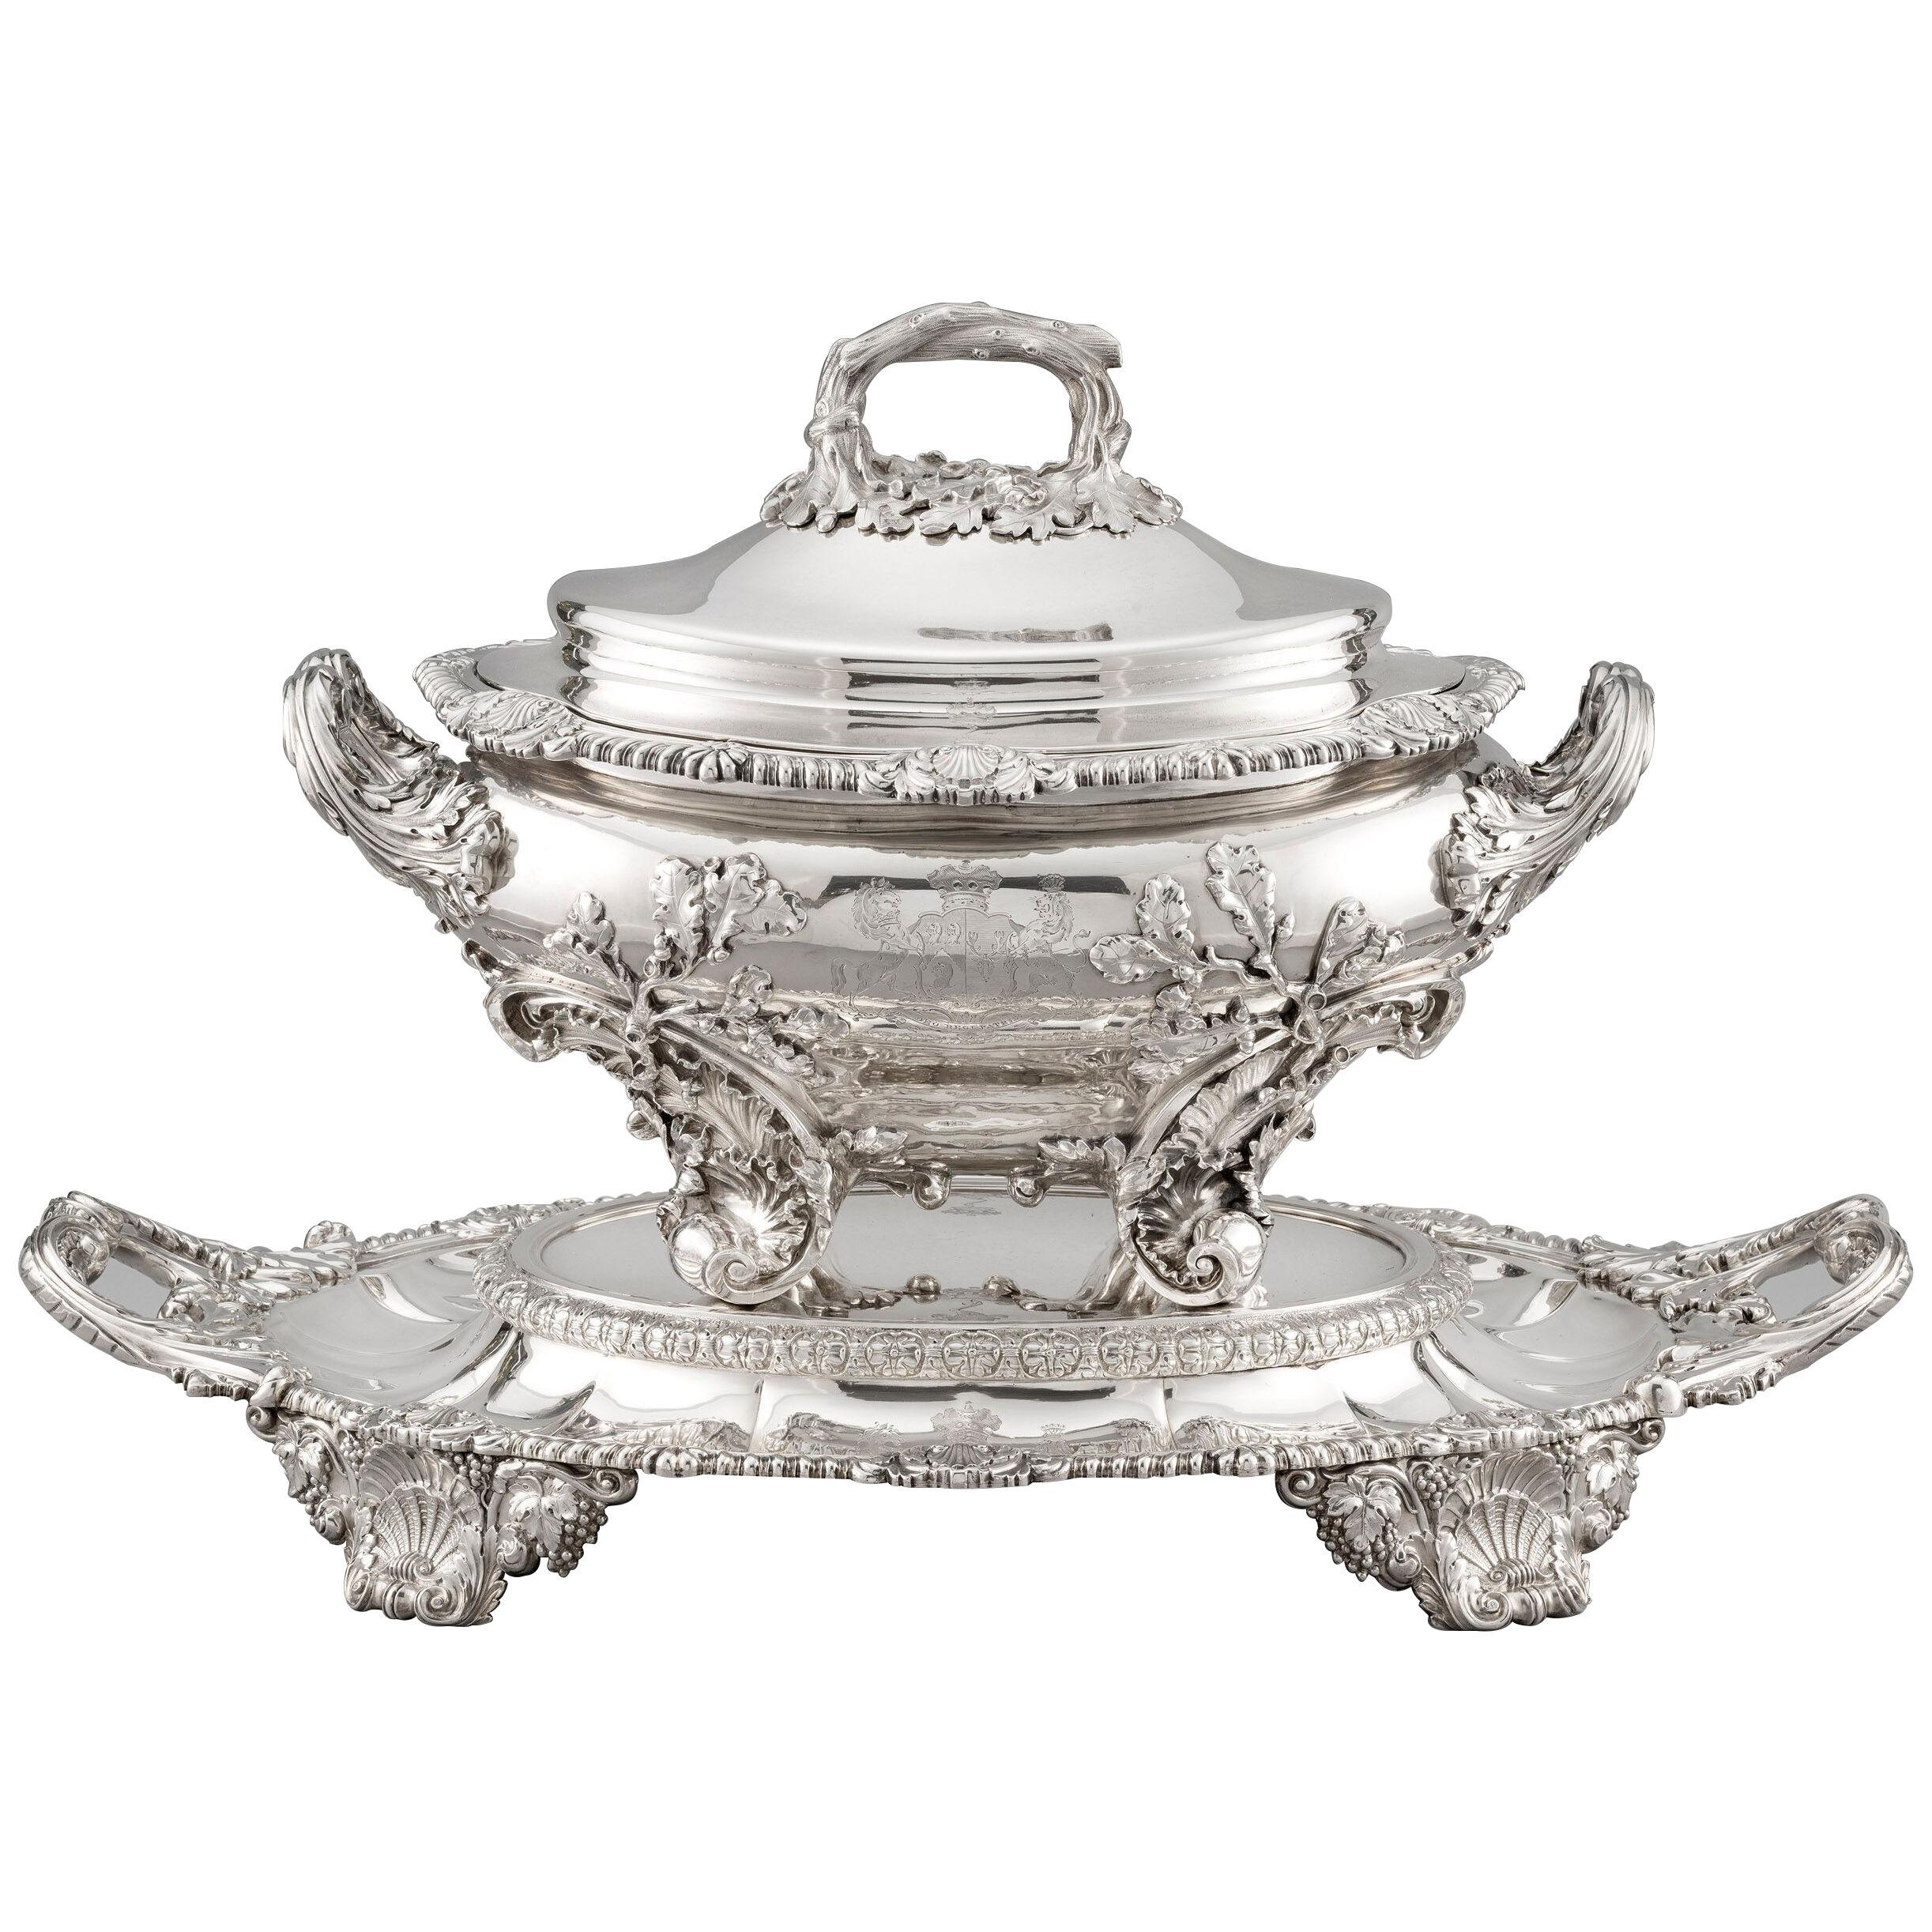 A Regency Two-Handled Soup Tureen on Stand